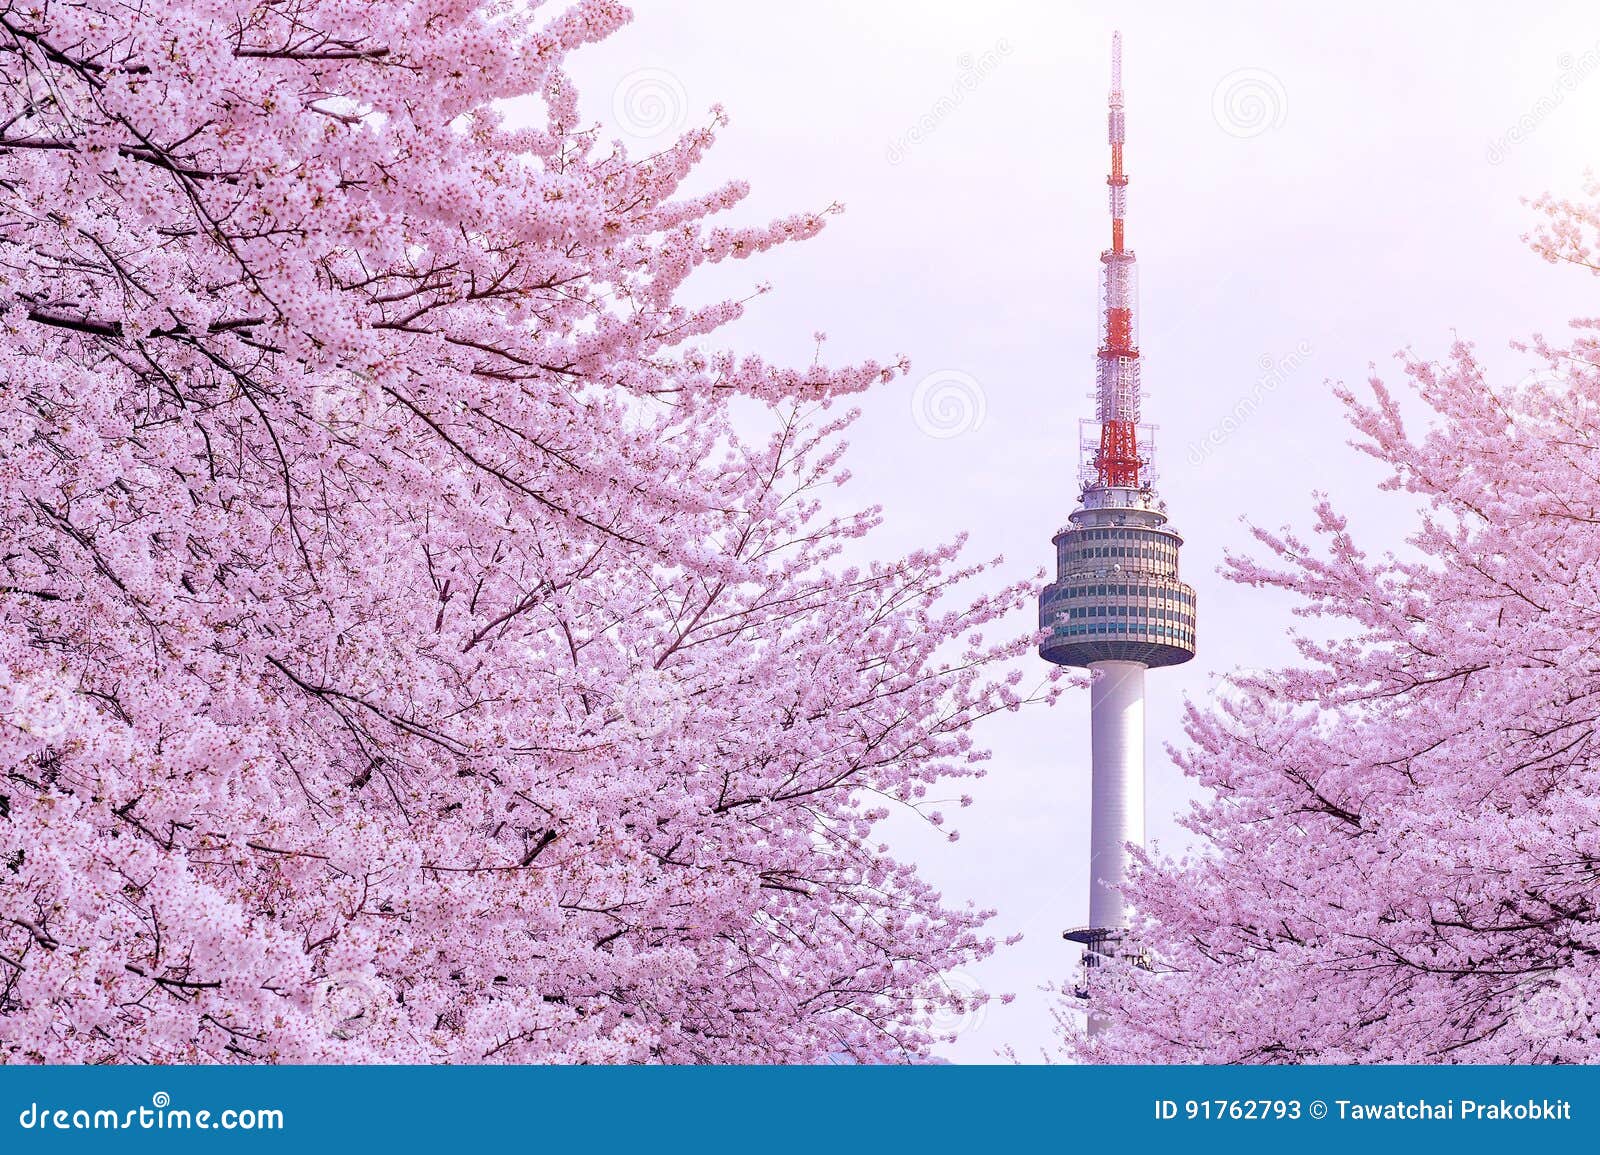 cherry blossom with seoul tower.